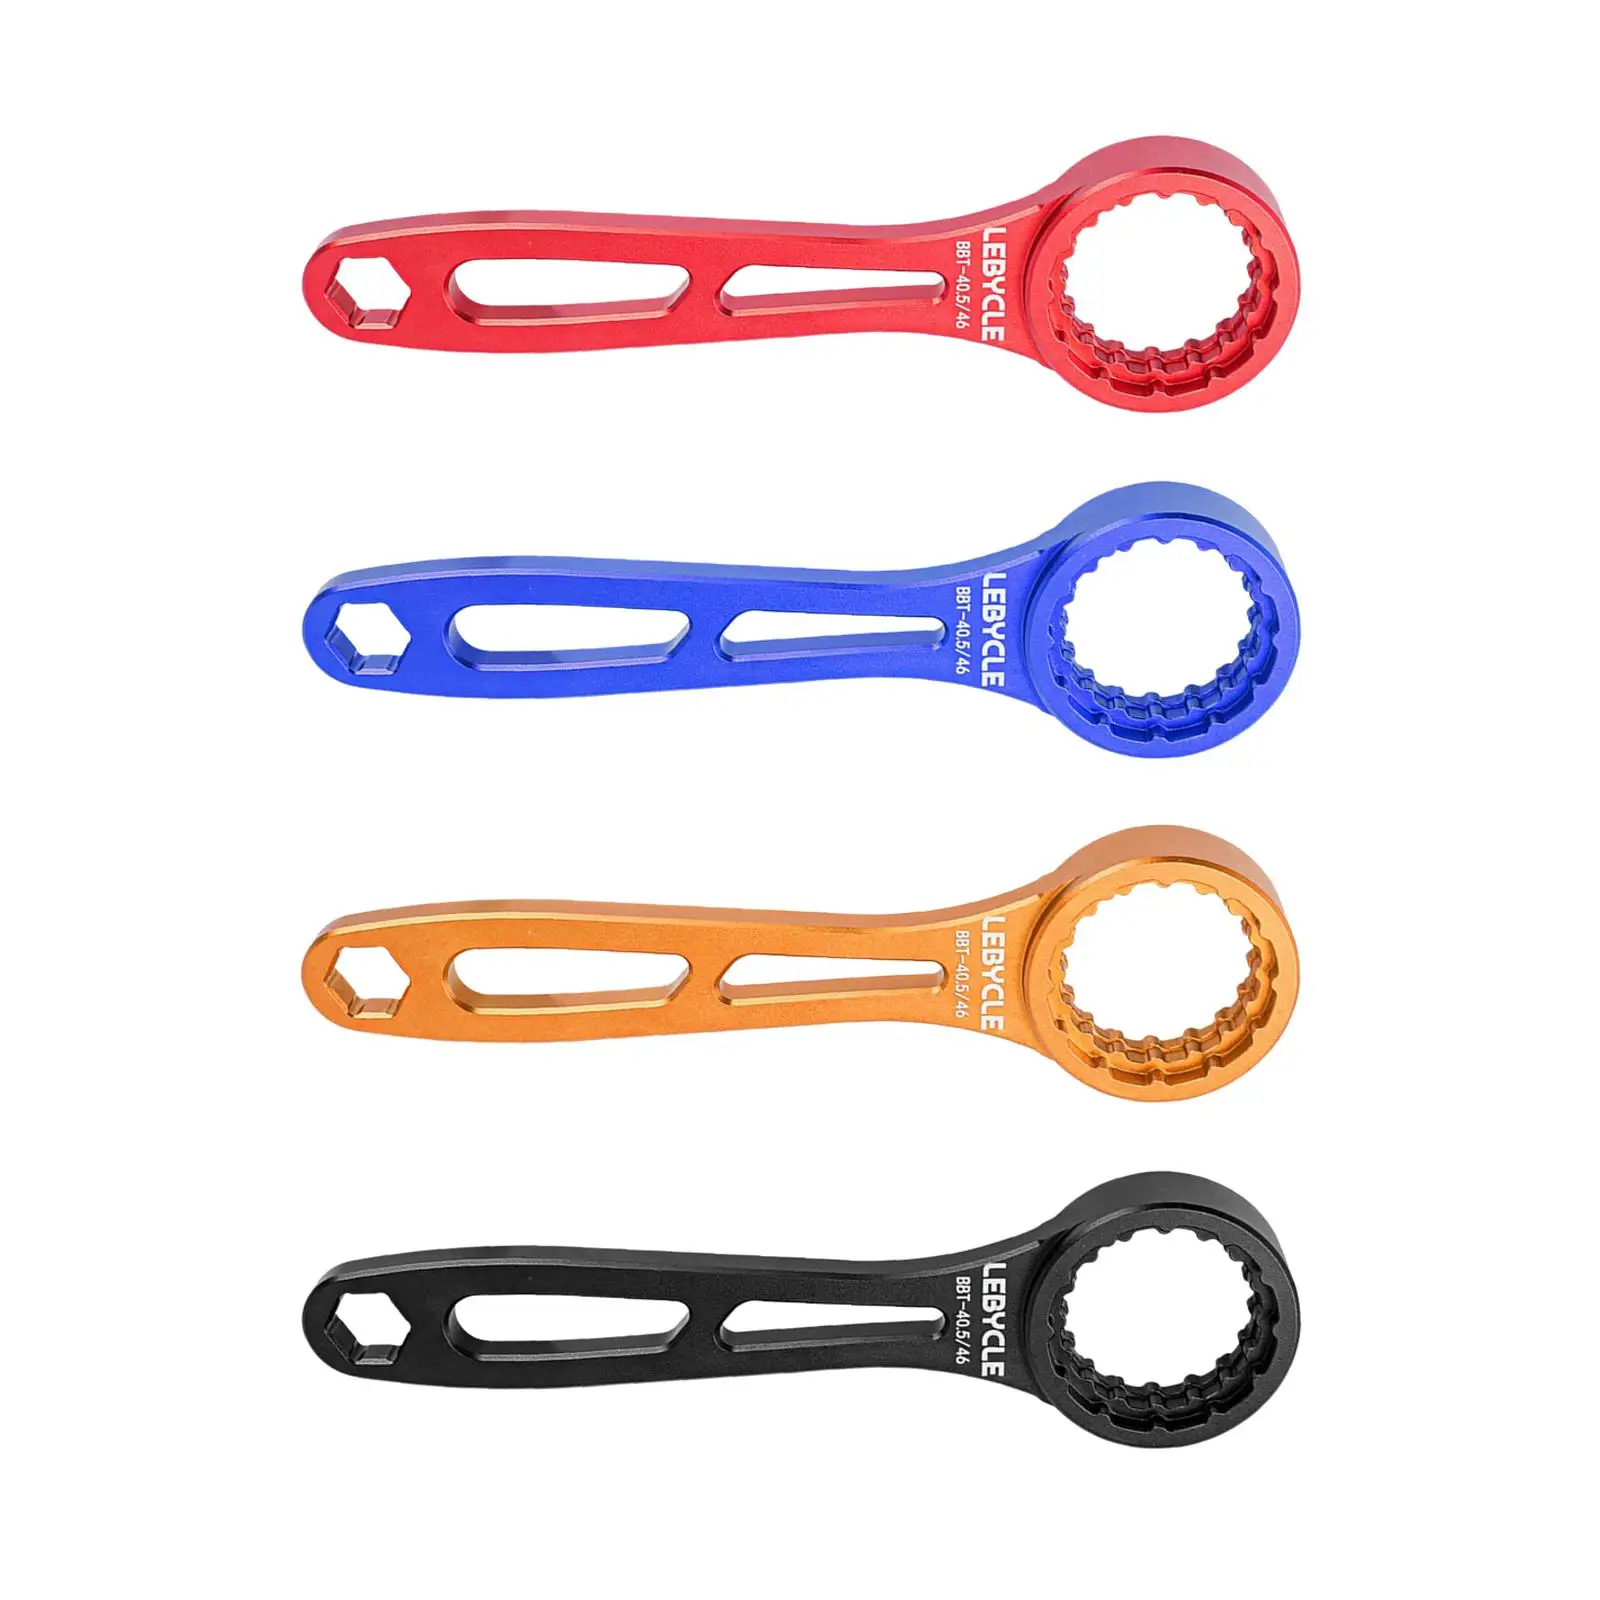   Bottom Bracket Wrench BB Spanner Aluminum Alloy for BB Axis Wrench